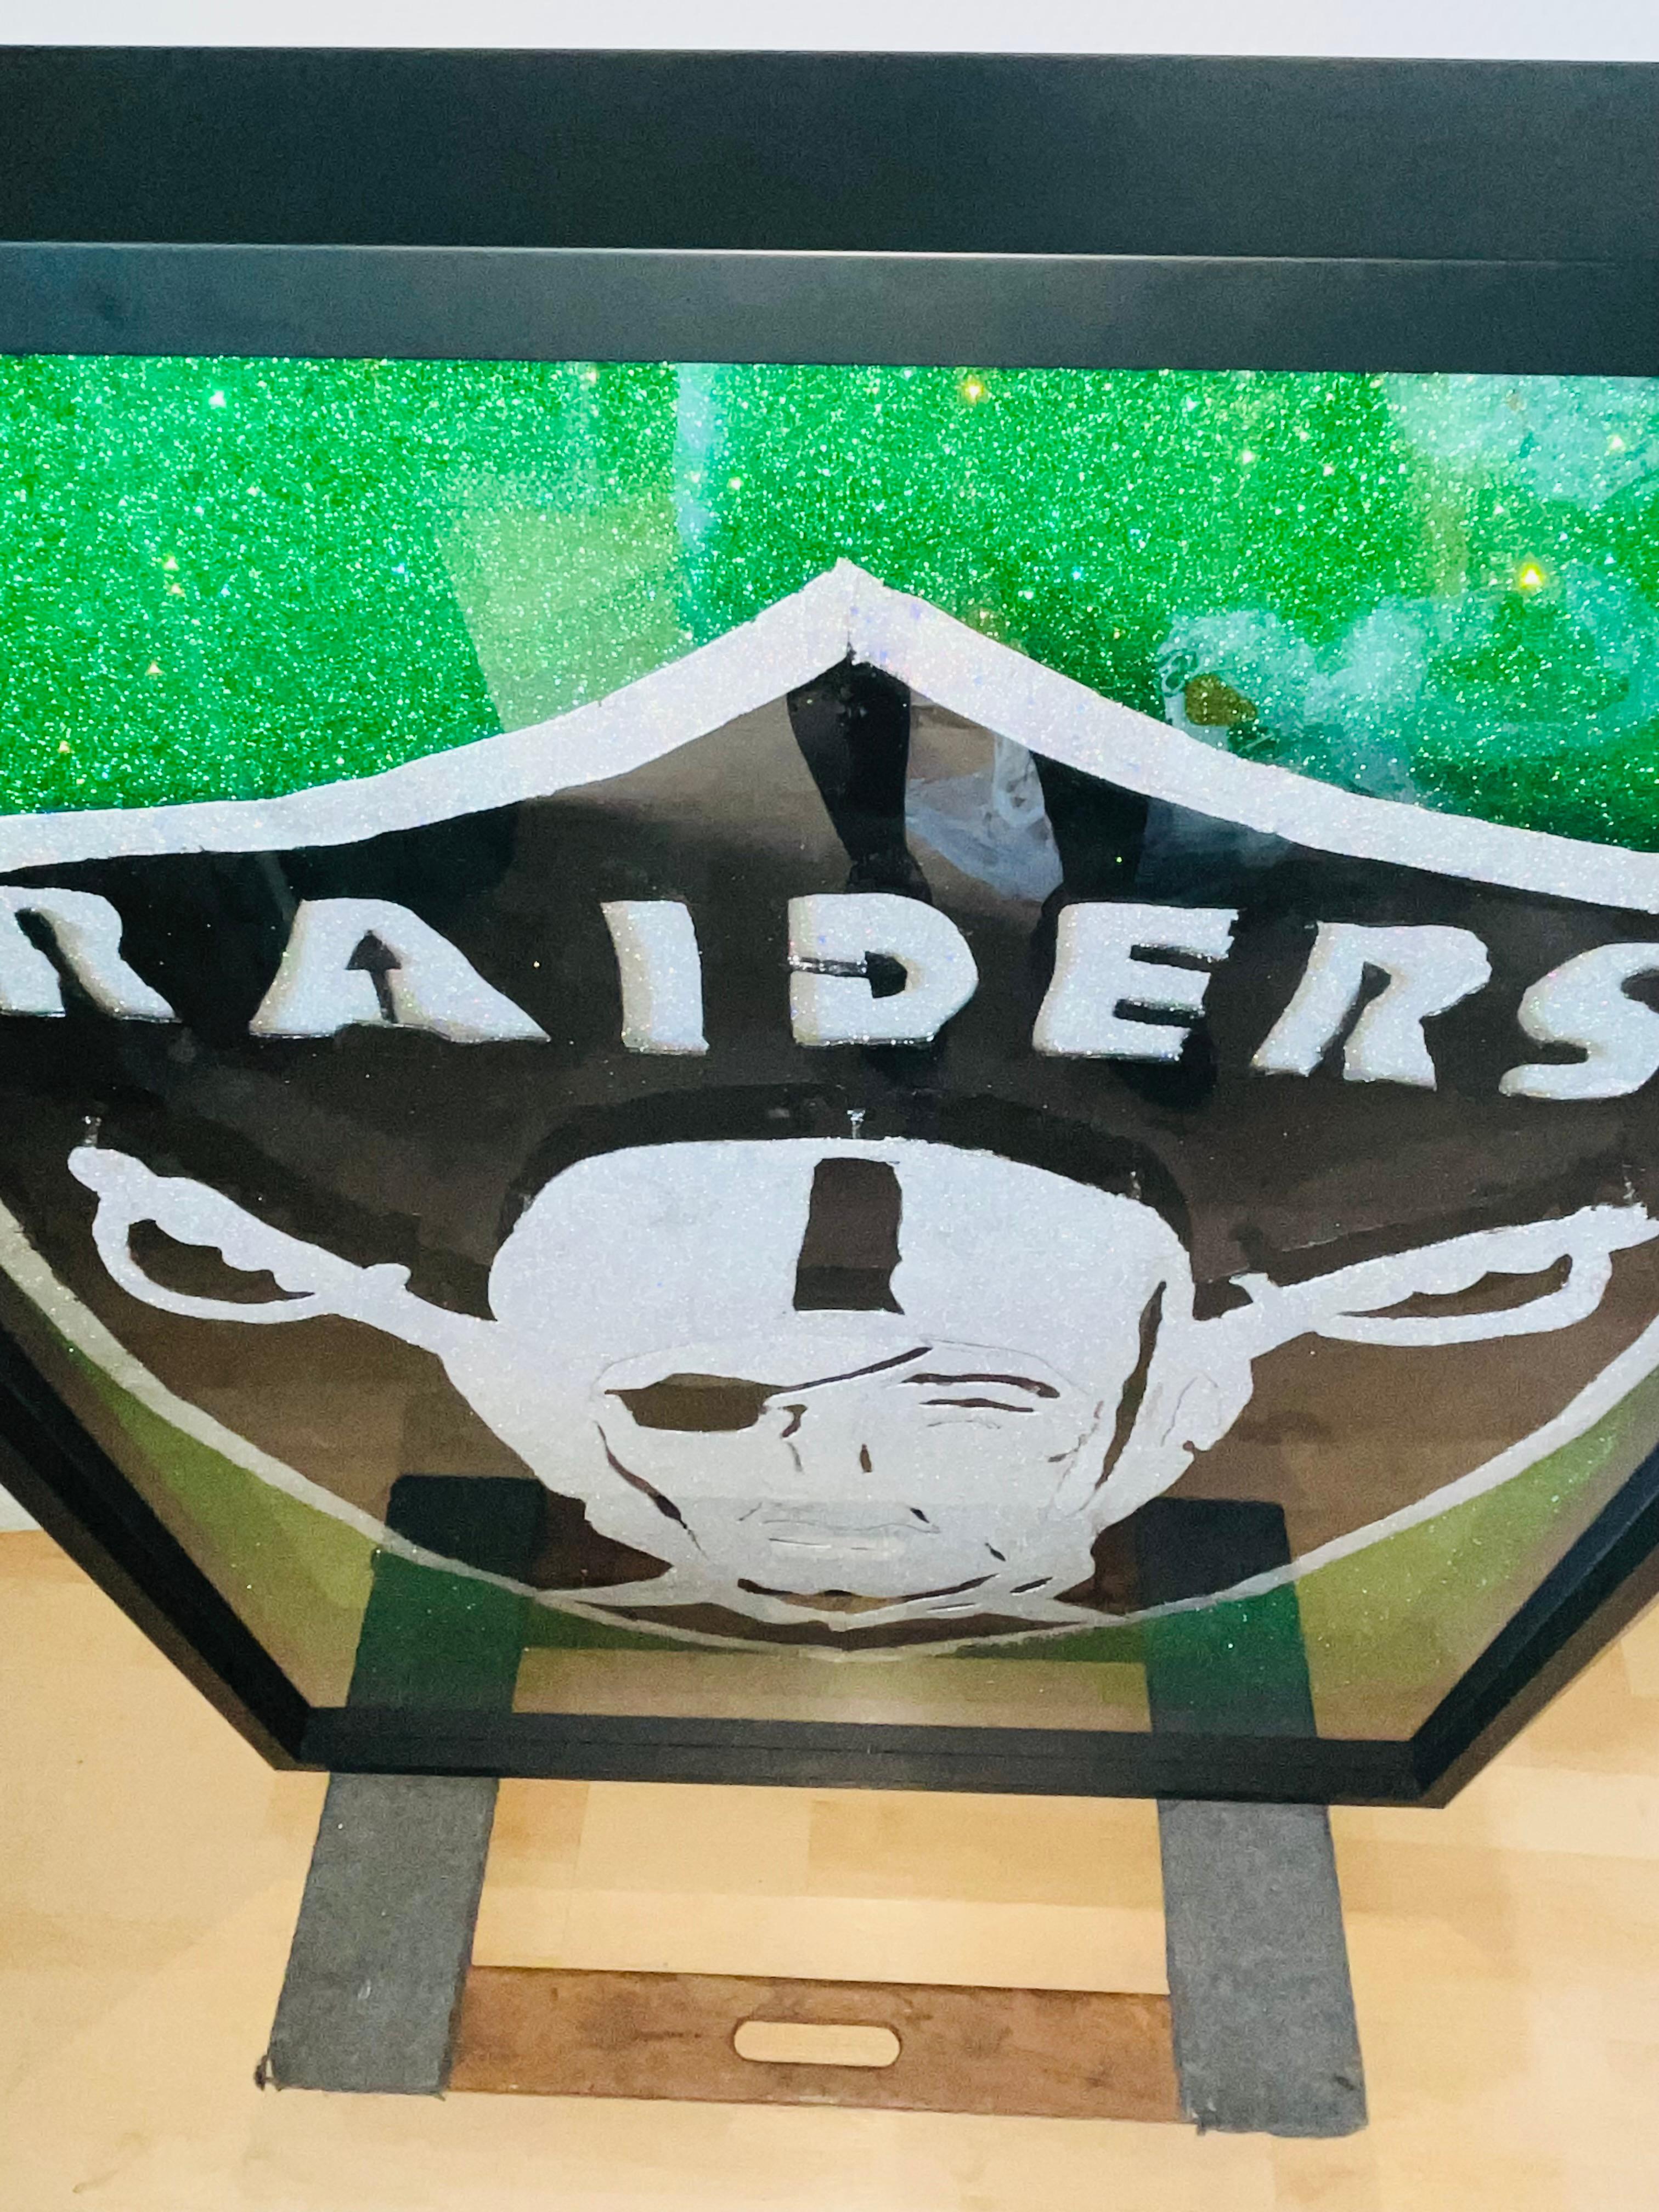 RAIDERS REIGN (Original And One Of A Kind Wall/Floor/Shelve Sculpture) - Pop Art Mixed Media Art by Mauro Oliveira